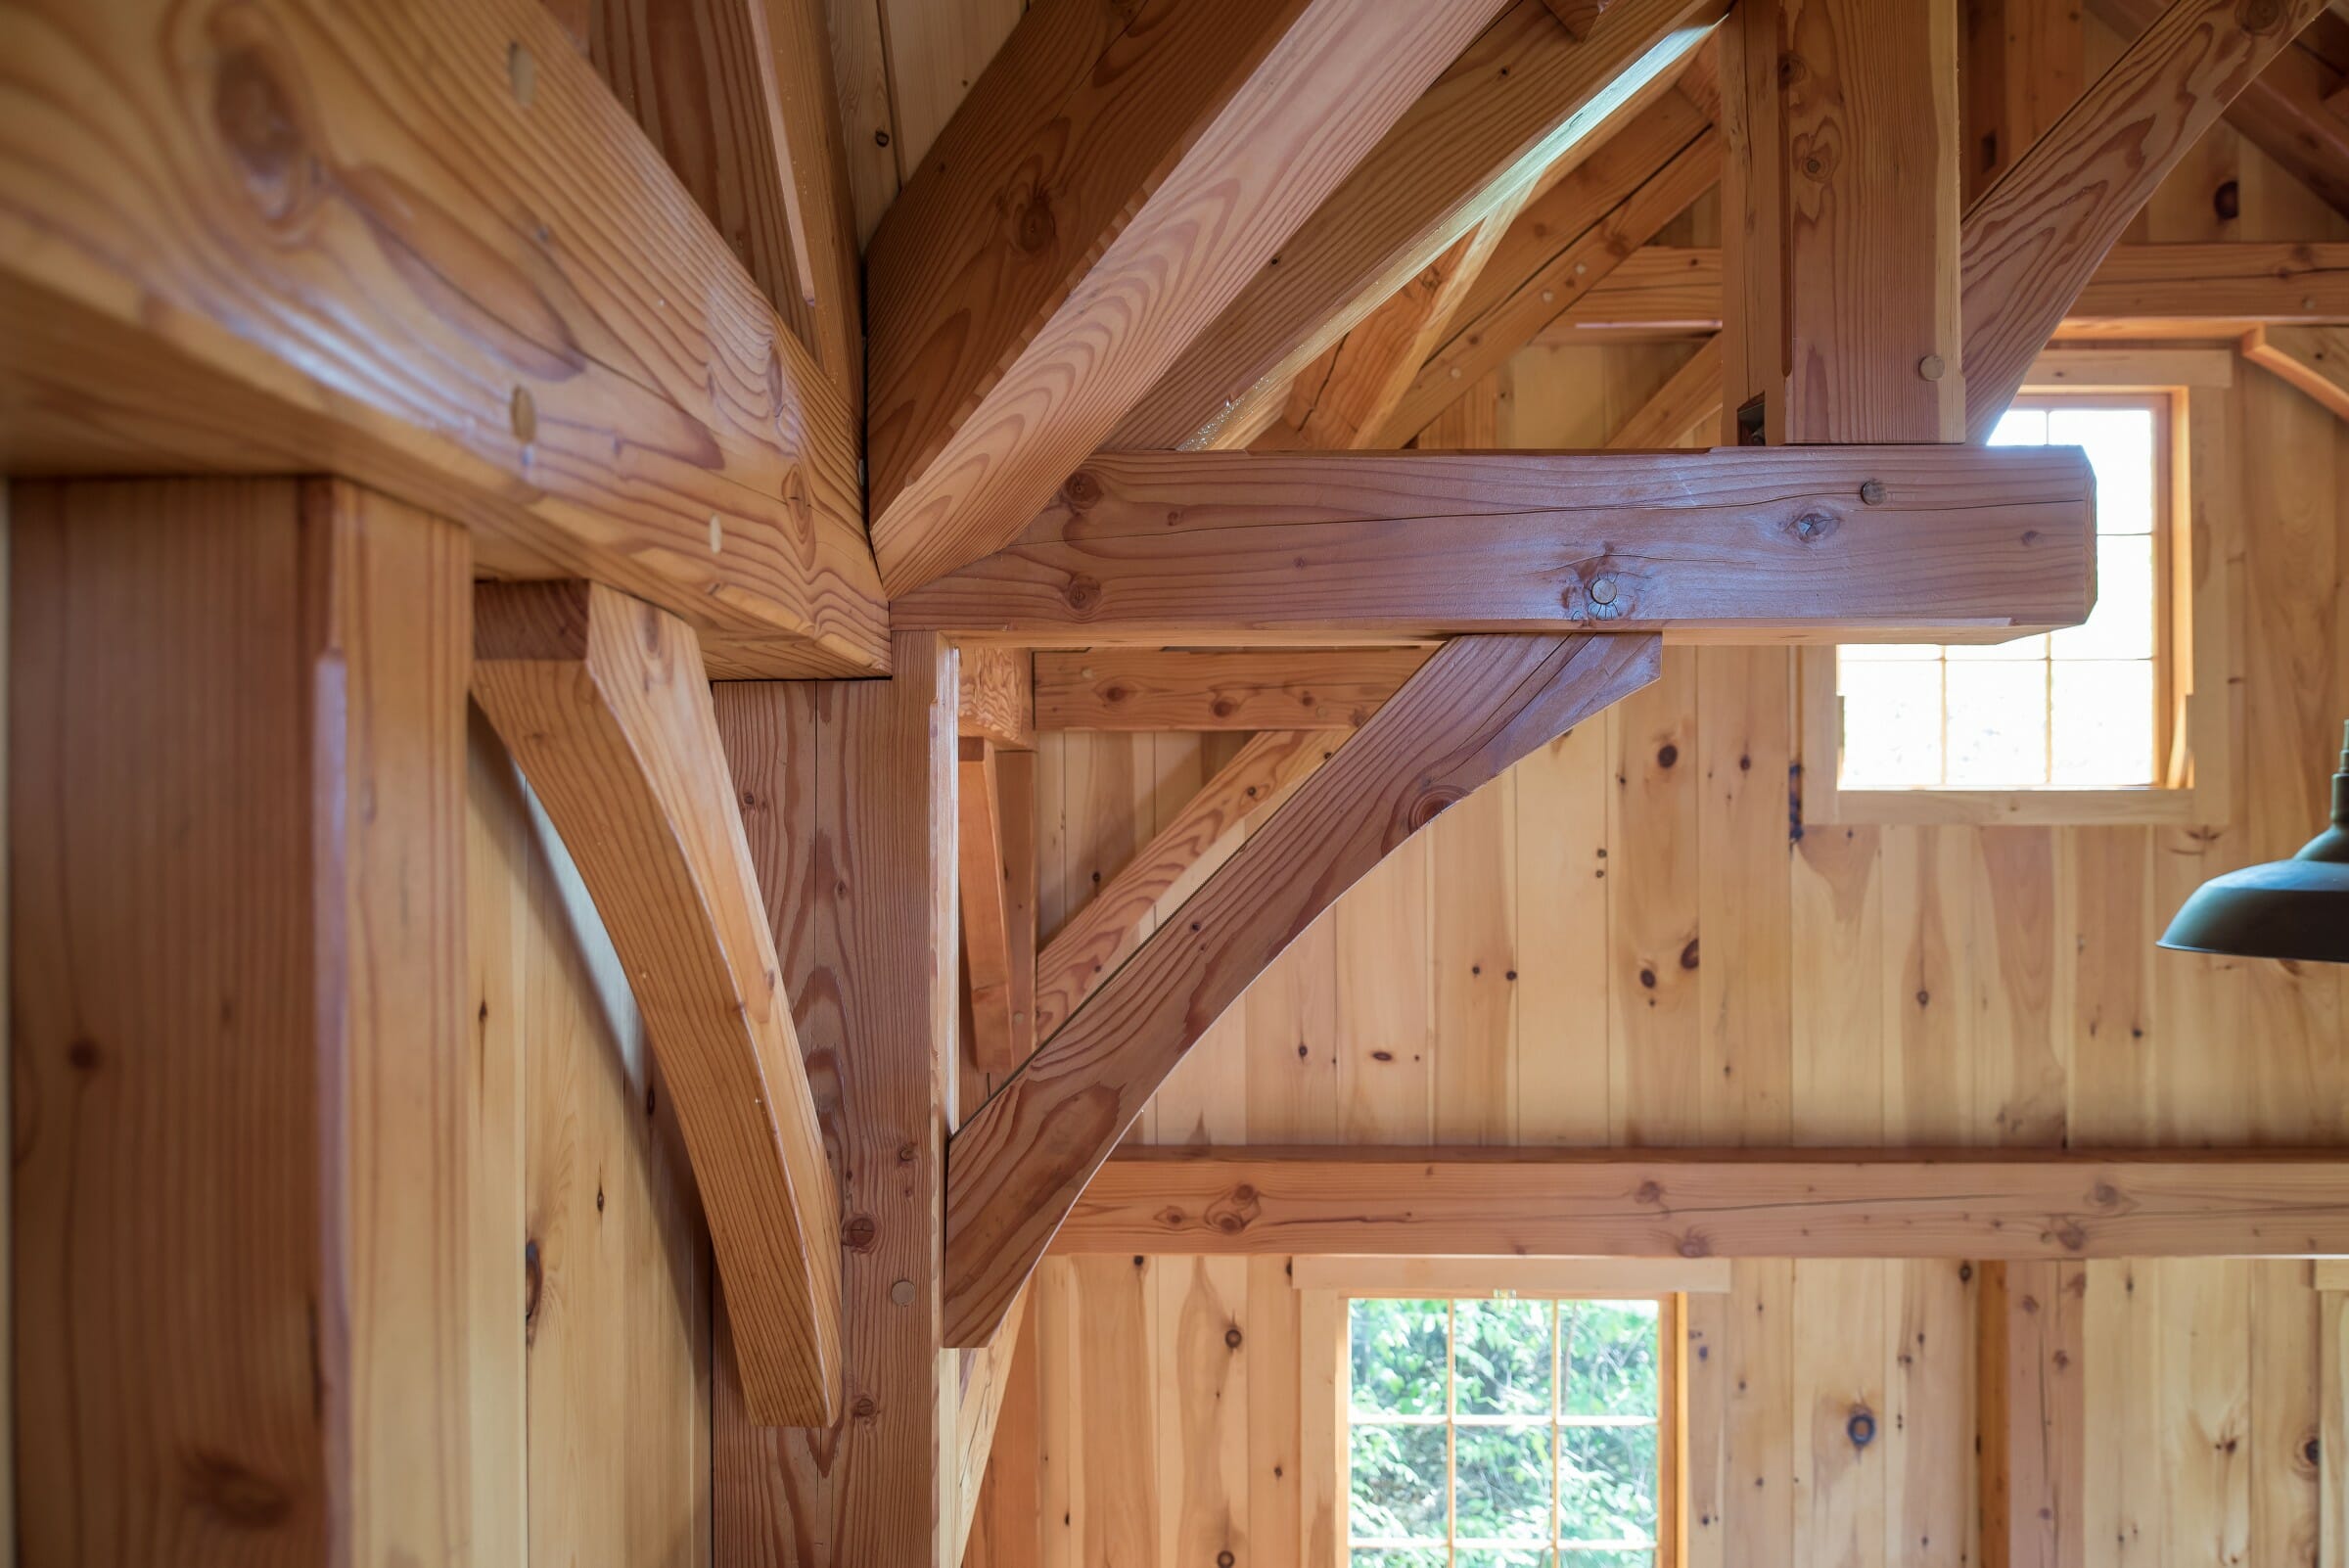 Ox Hill Barn in Vermont Fabricated from Glulam and Douglas Fir.